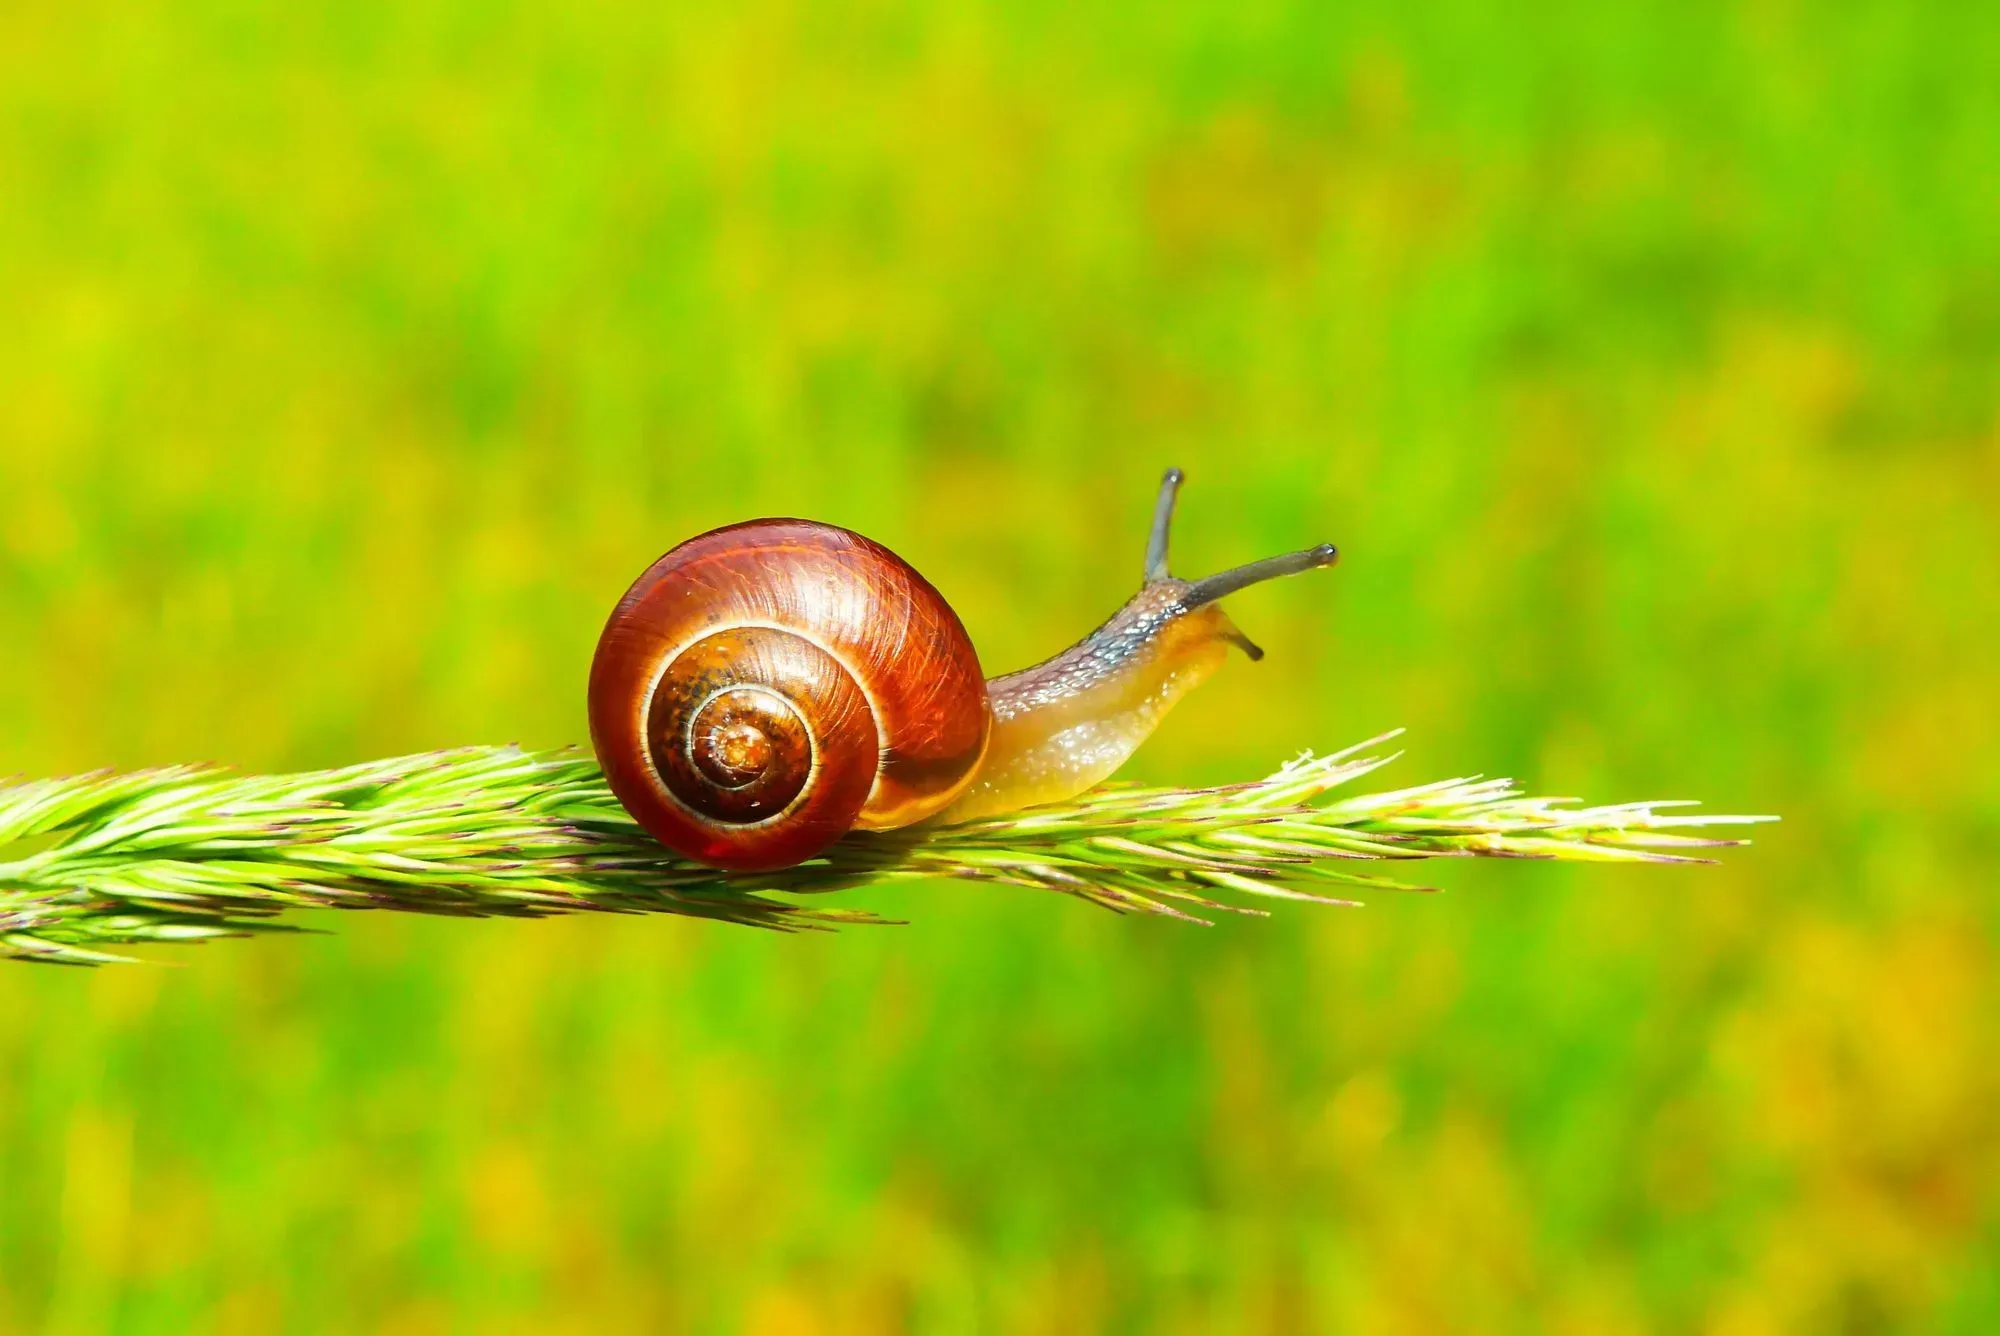 During courtship, snails are known to shoot love darts at each other and this is the first step after the start of the breeding process.